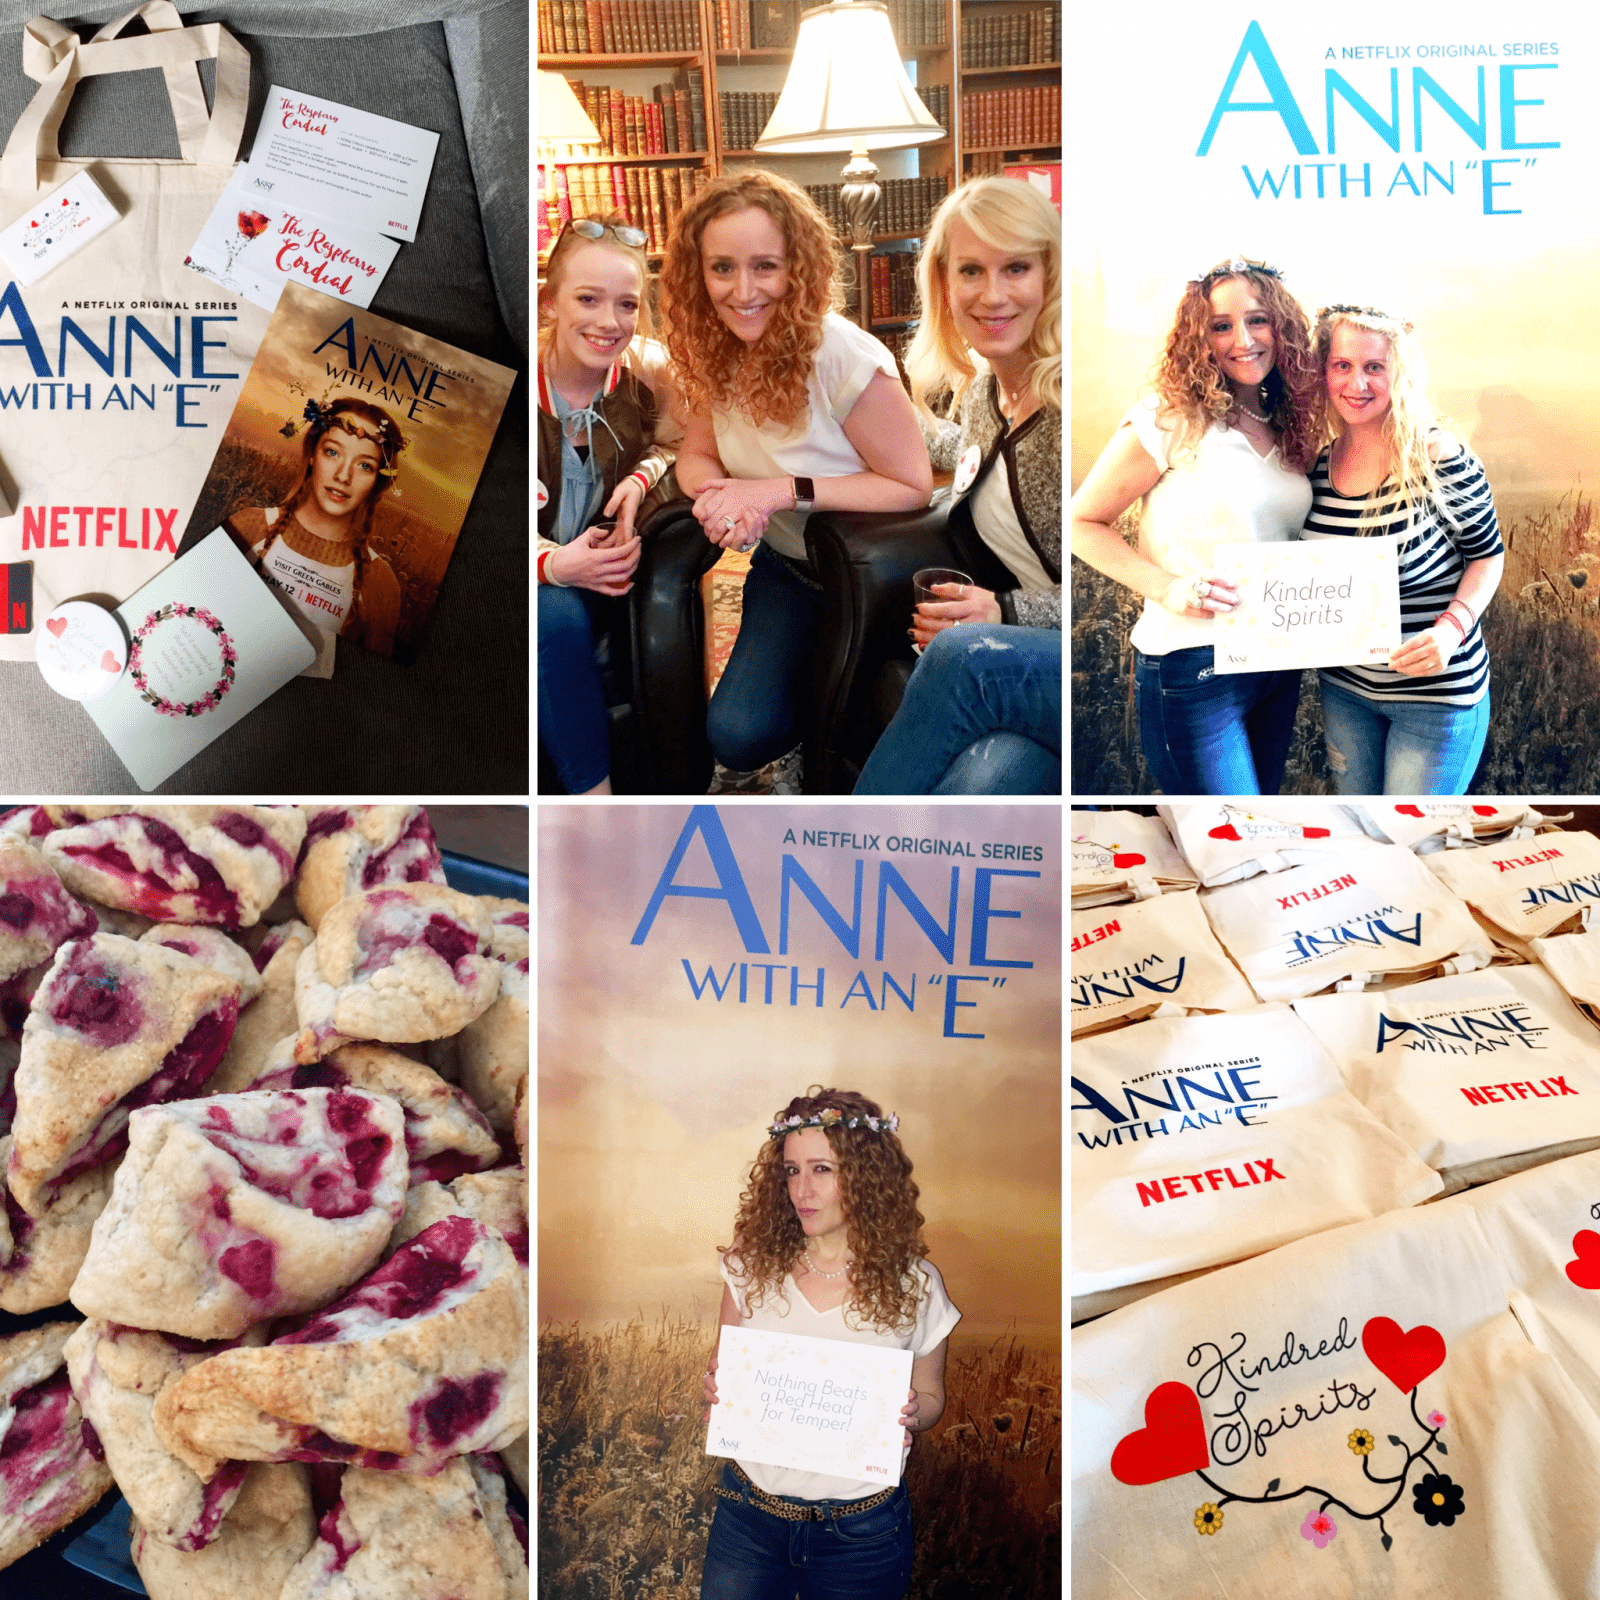 Anne with an E Netflix event, NYC, The Strand